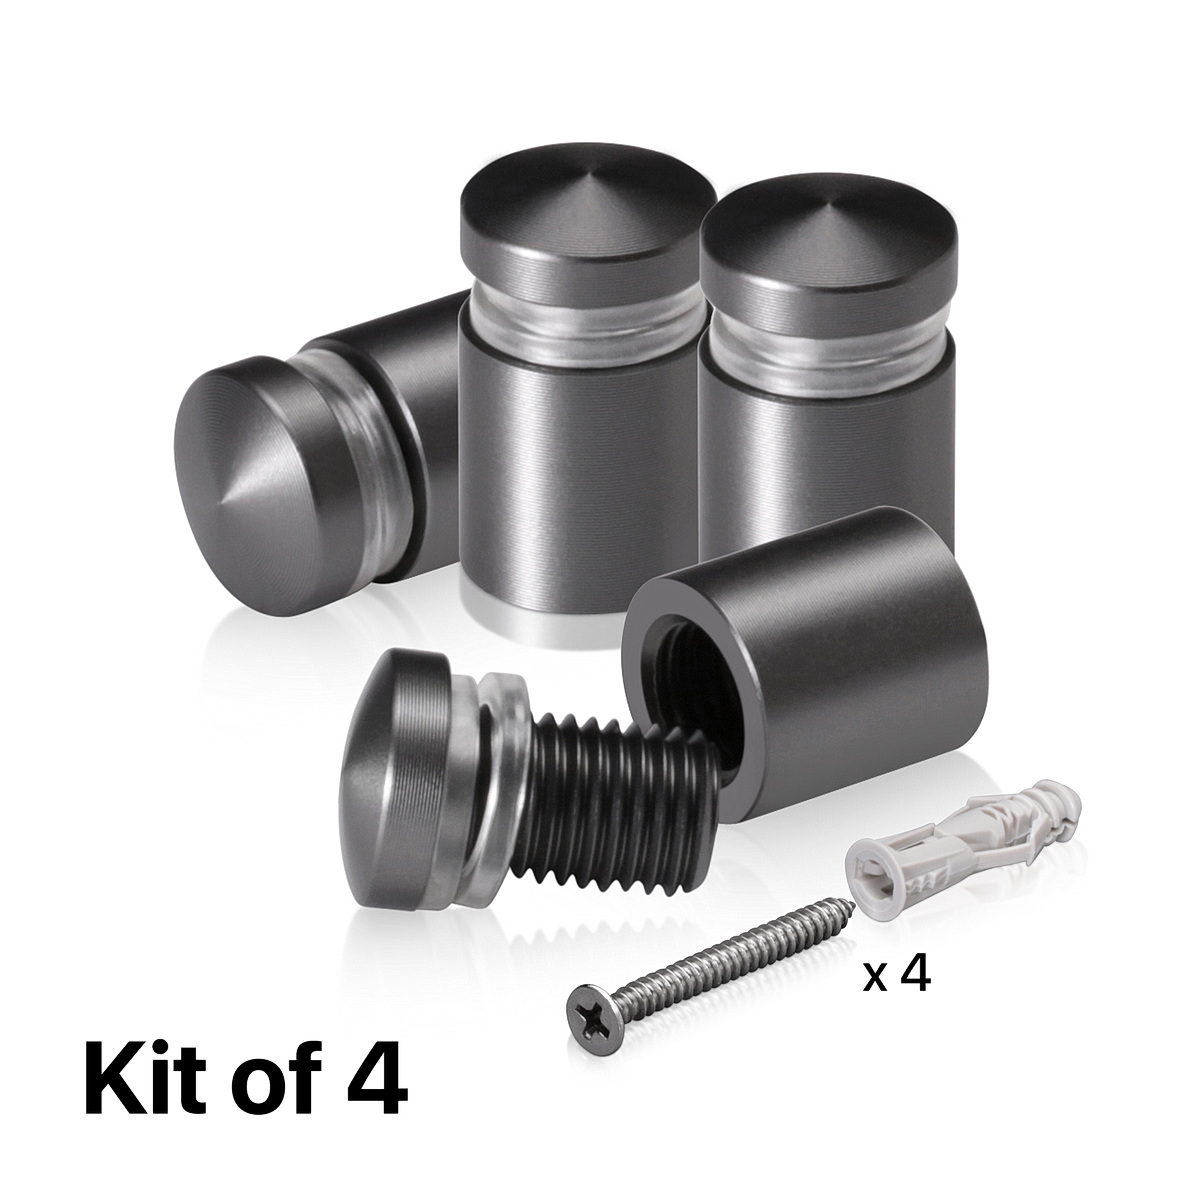 (Set of 4) 1/2'' Diameter X 1/2'' Barrel Length, Aluminum Rounded Head Standoffs, Titanium Anodized Finish Standoff with (4) 2208Z Screw and (4) LANC1 Anchor for concrete or drywall (For Inside / Outside use) [Required Material Hole Size: 3/8'']